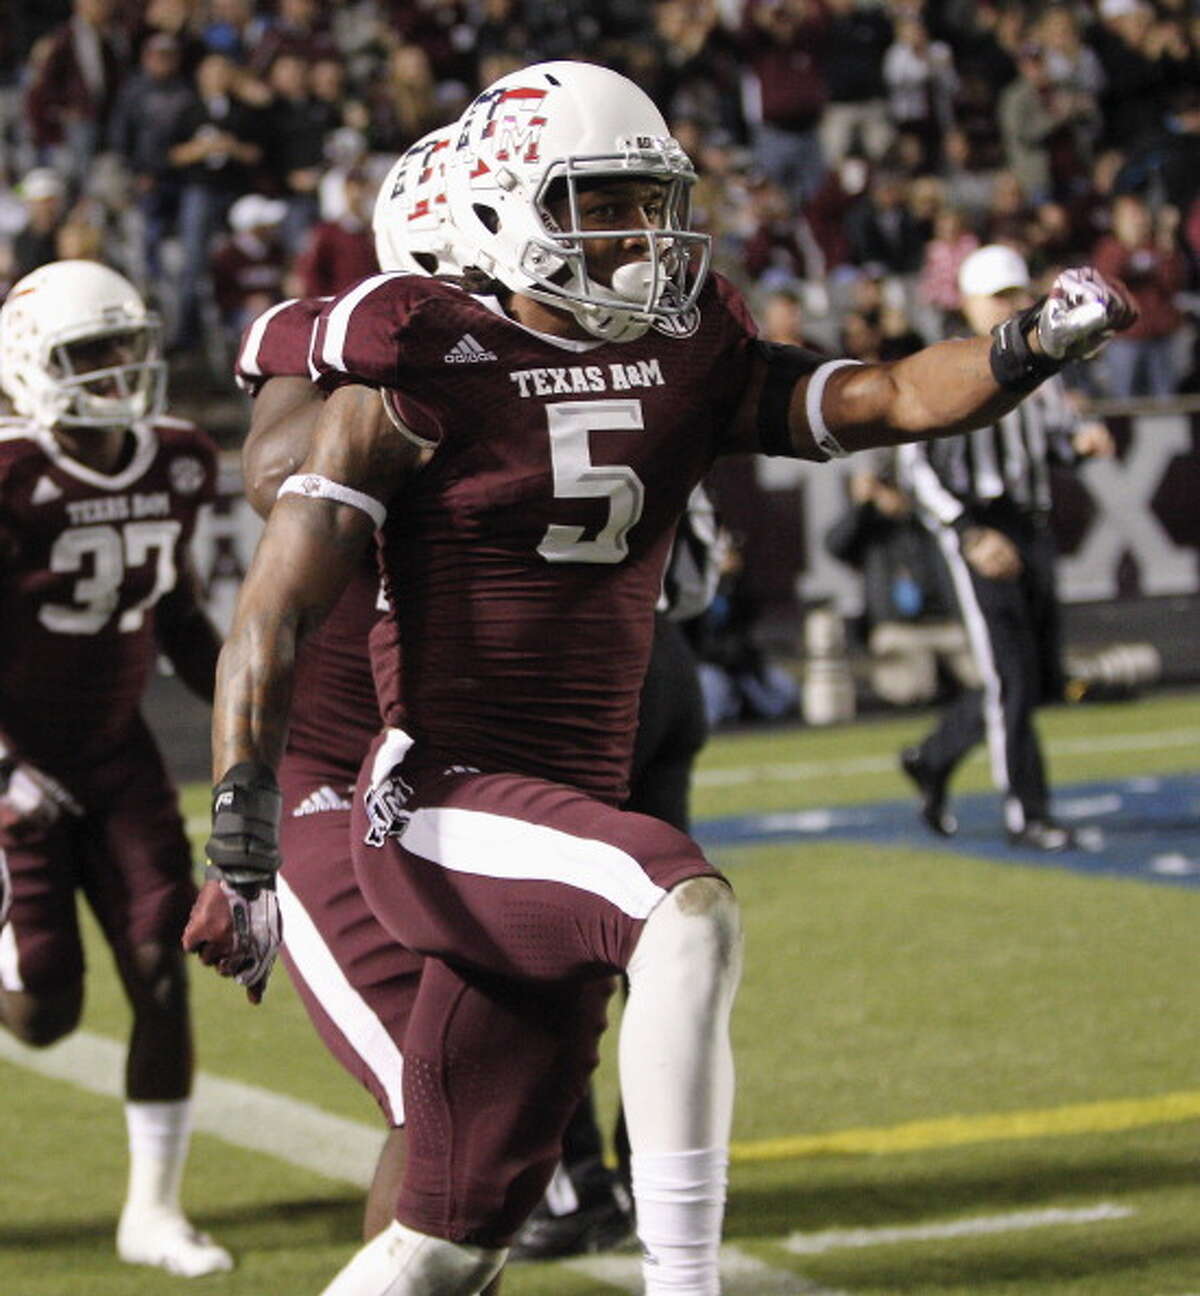 Floyd Raven Sr. #5 of the Texas A&M Aggies celebrtaes after blocking a punt by UTEP Miners for a safety in the first quarter at Kyle Field on November 2, 2013 in College Station, Texas.